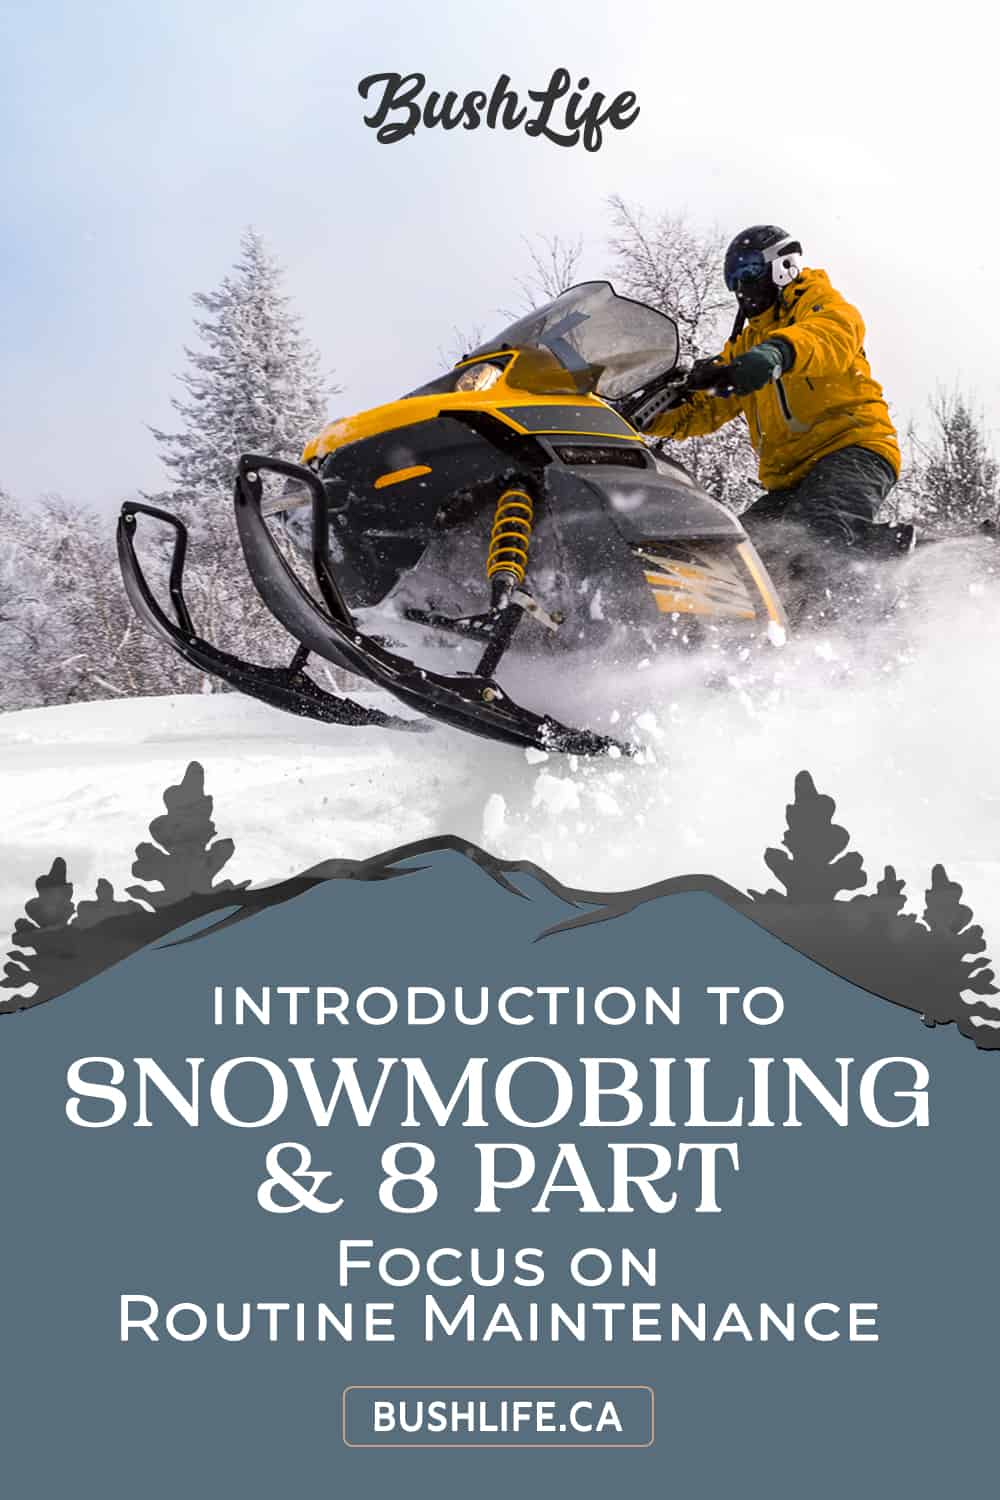 Introduction to Snowmobiling & 8 Part Focus on Routine Maintenance